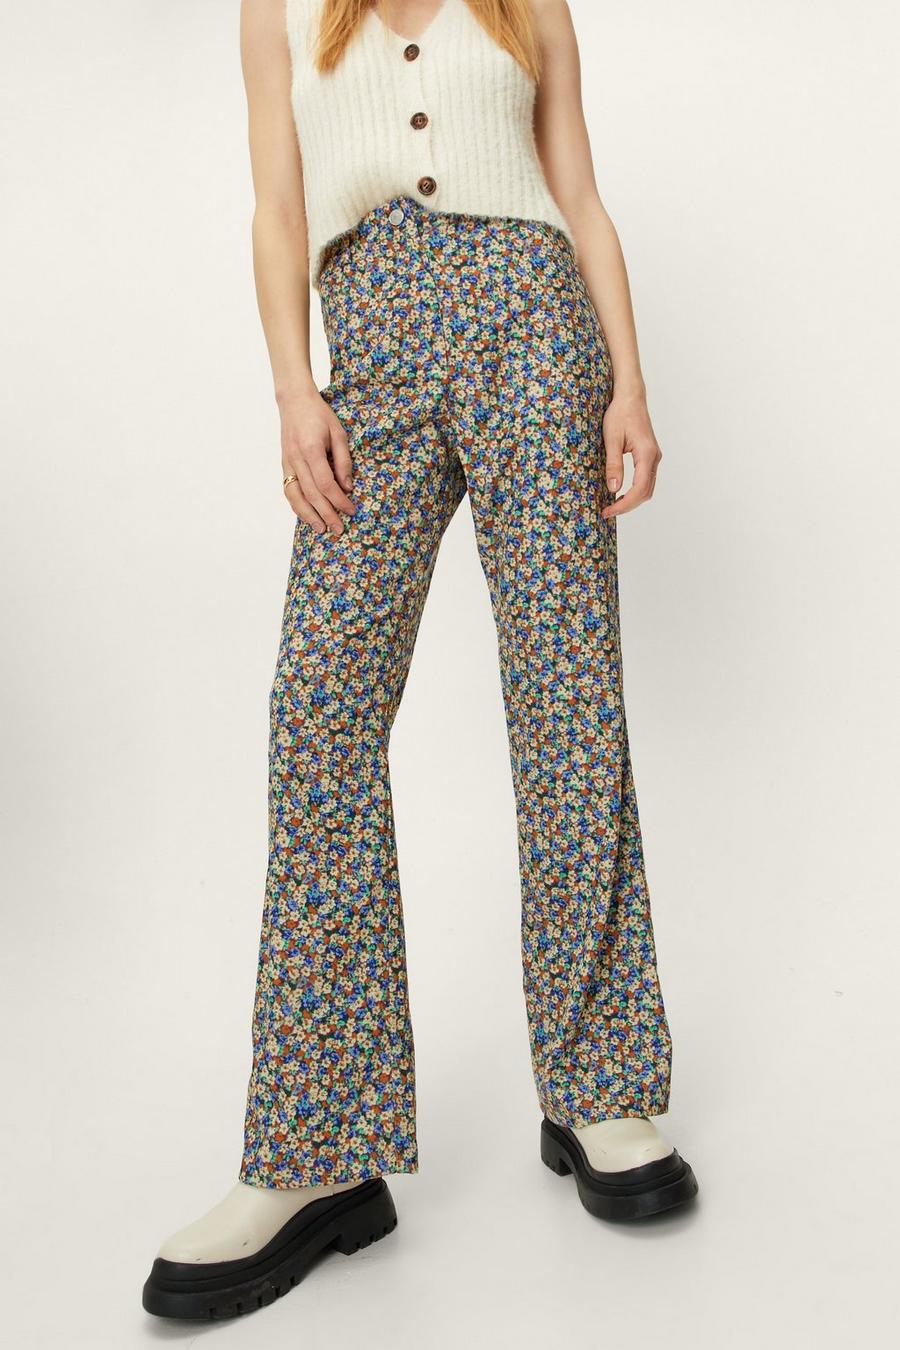 Twill High Waisted Floral Print Flared Pants